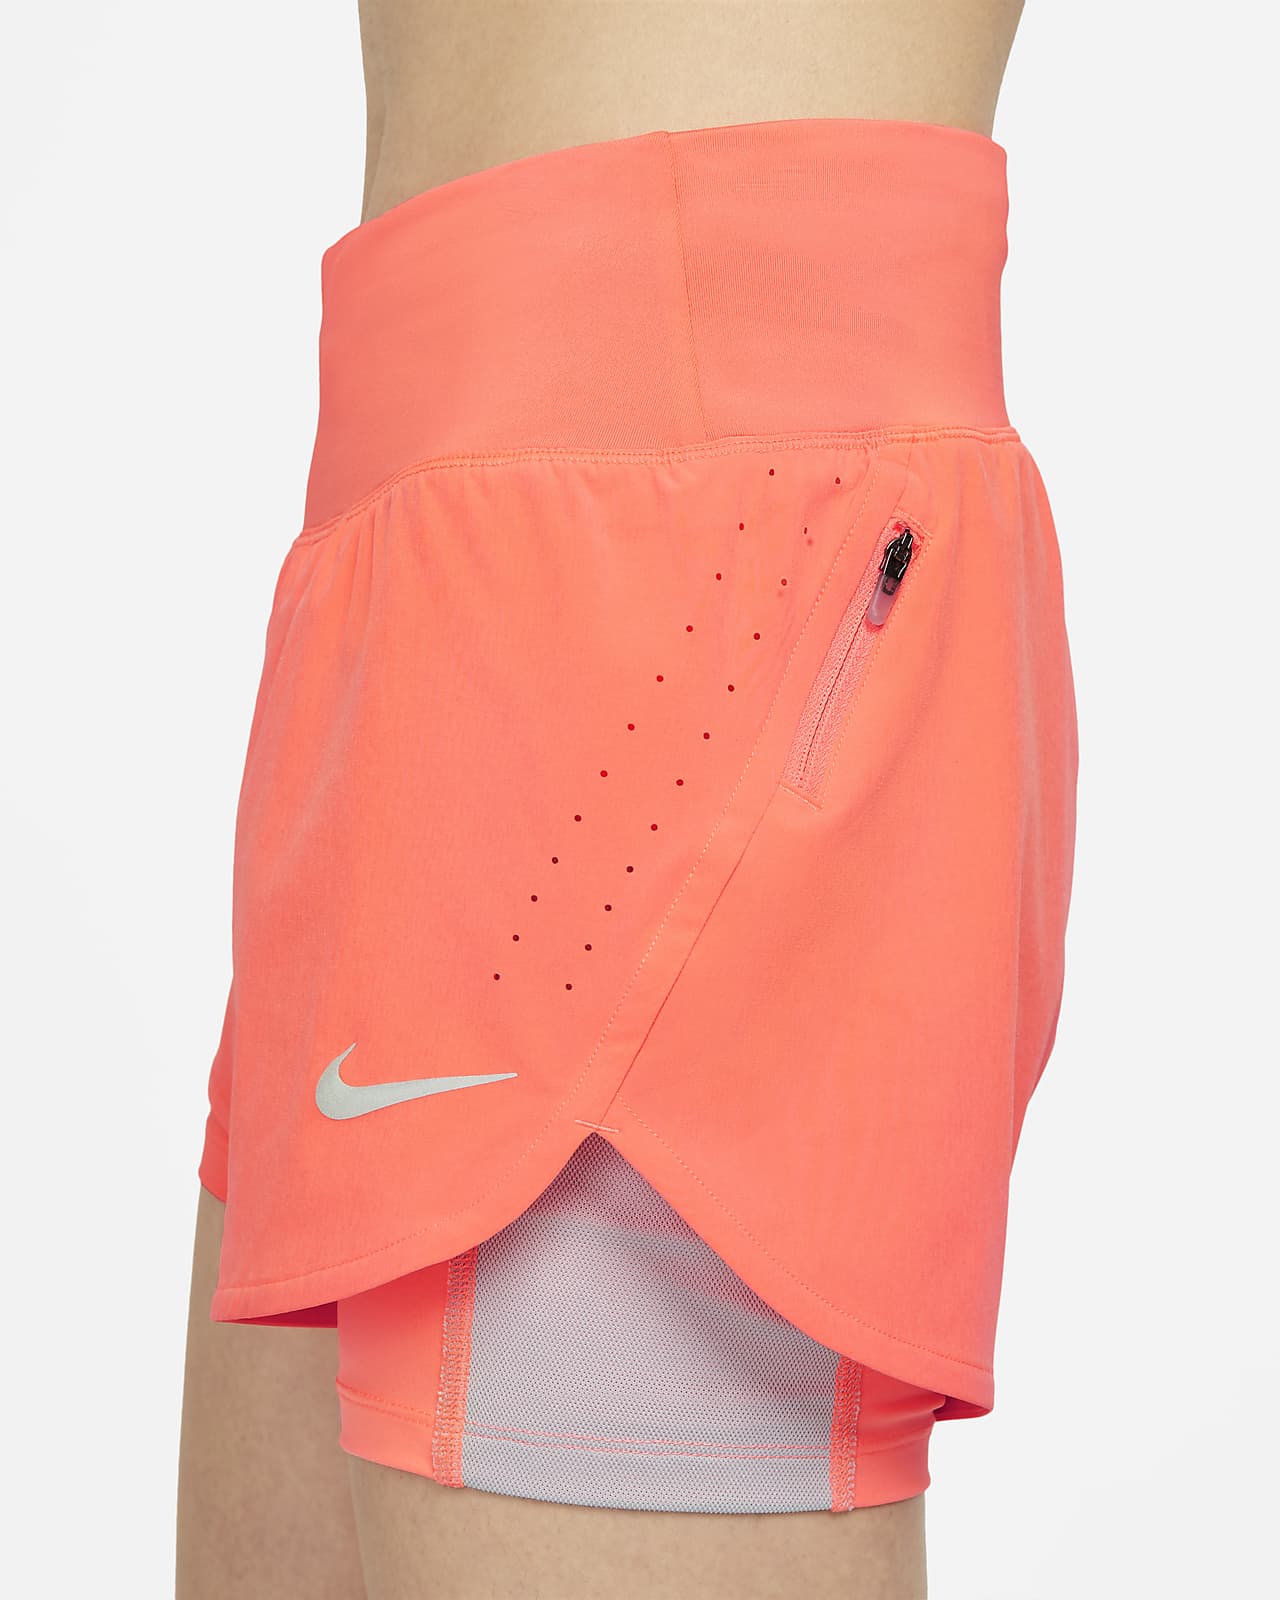 nike eclipse running shorts 2 in 1